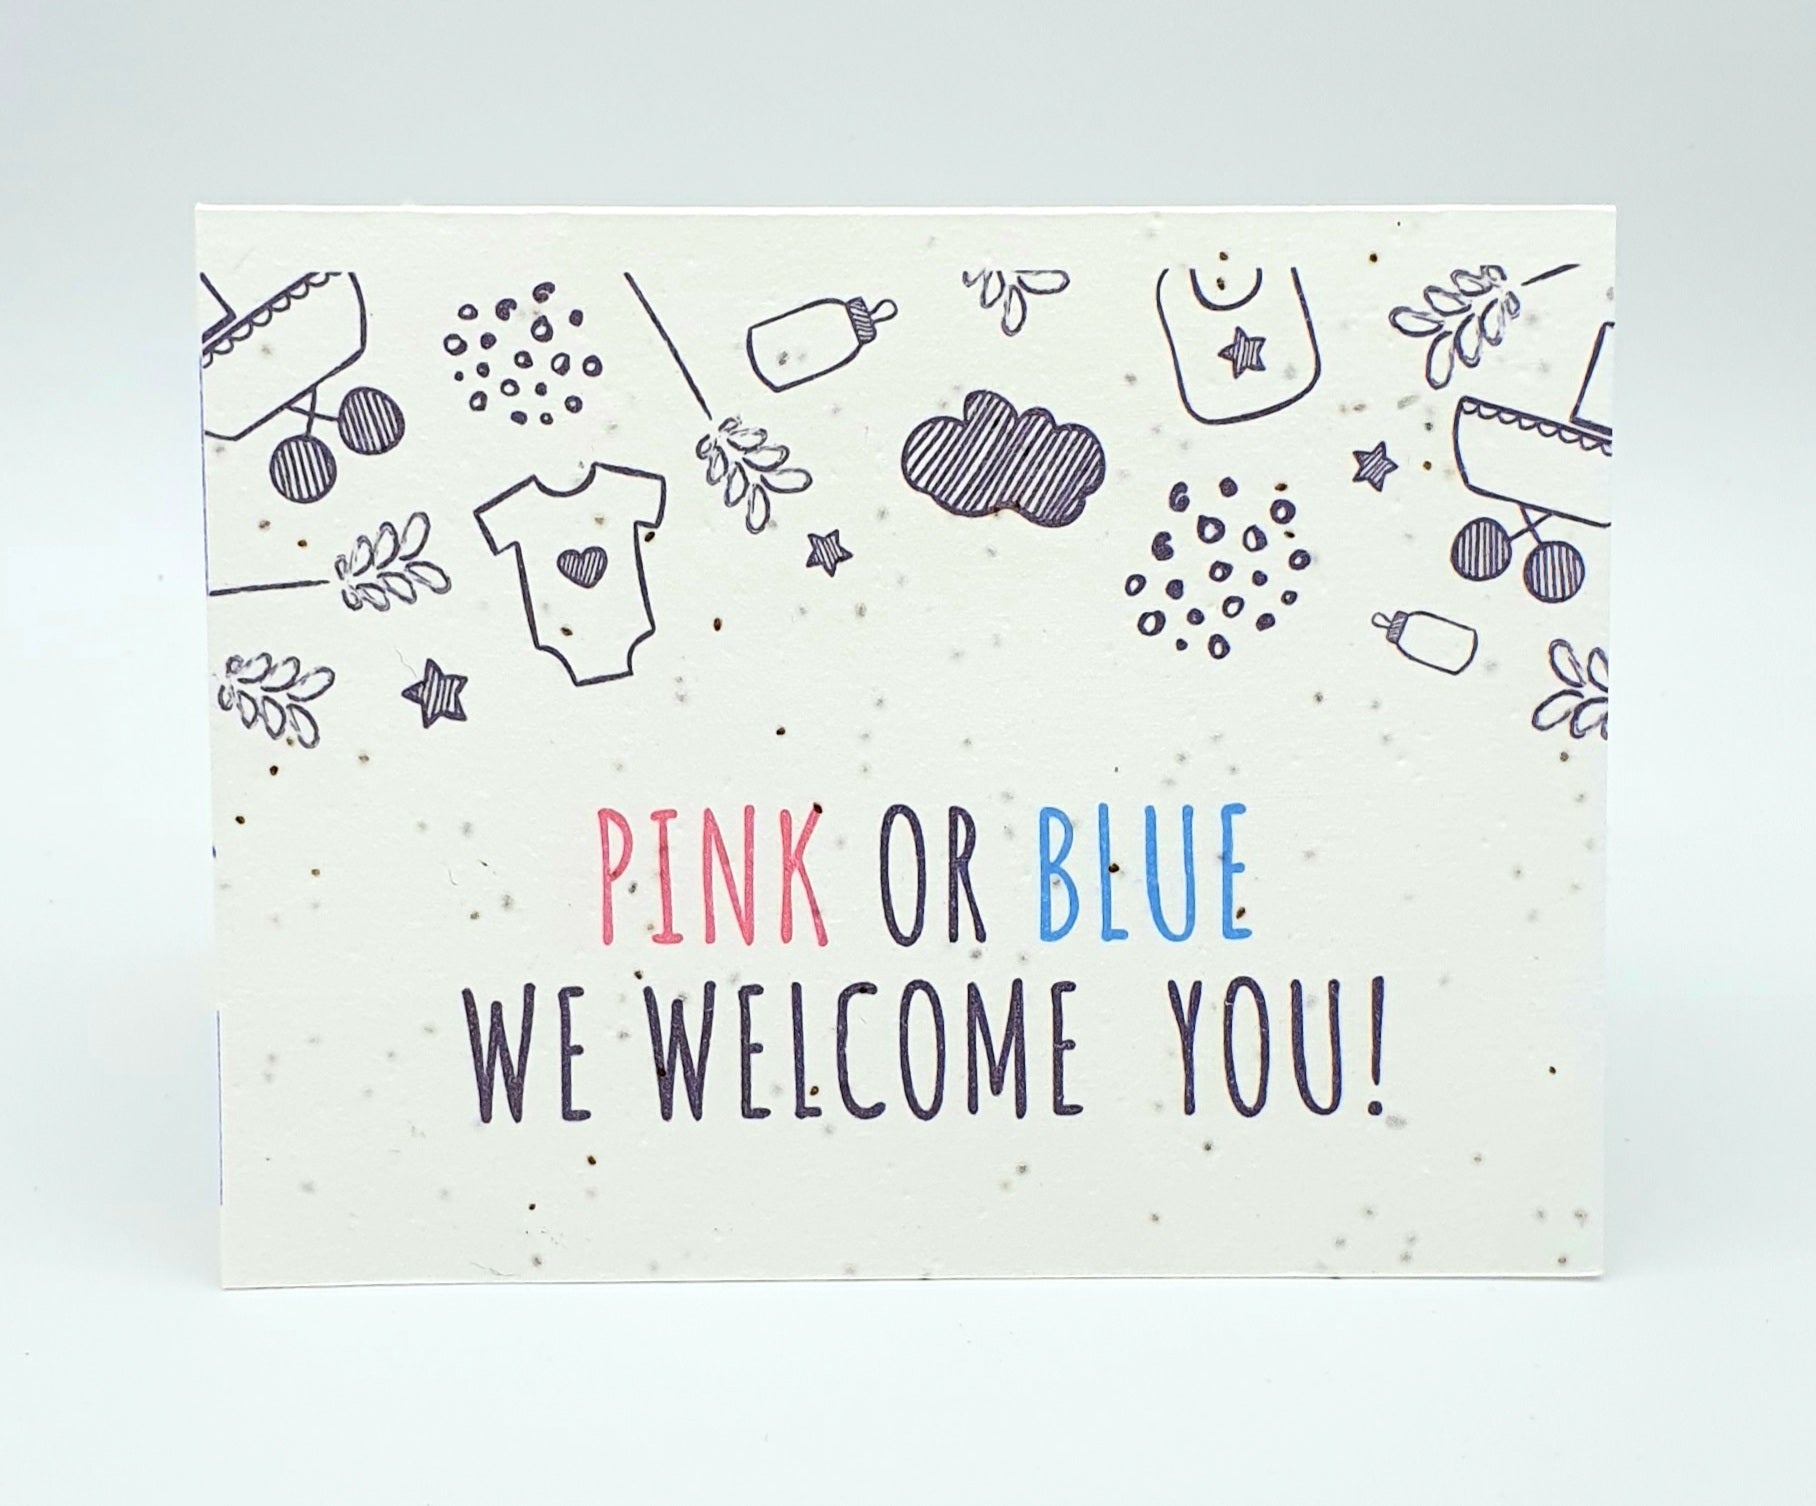 Plantable seed card with baby designs and "Pink or blue we welcome you!"